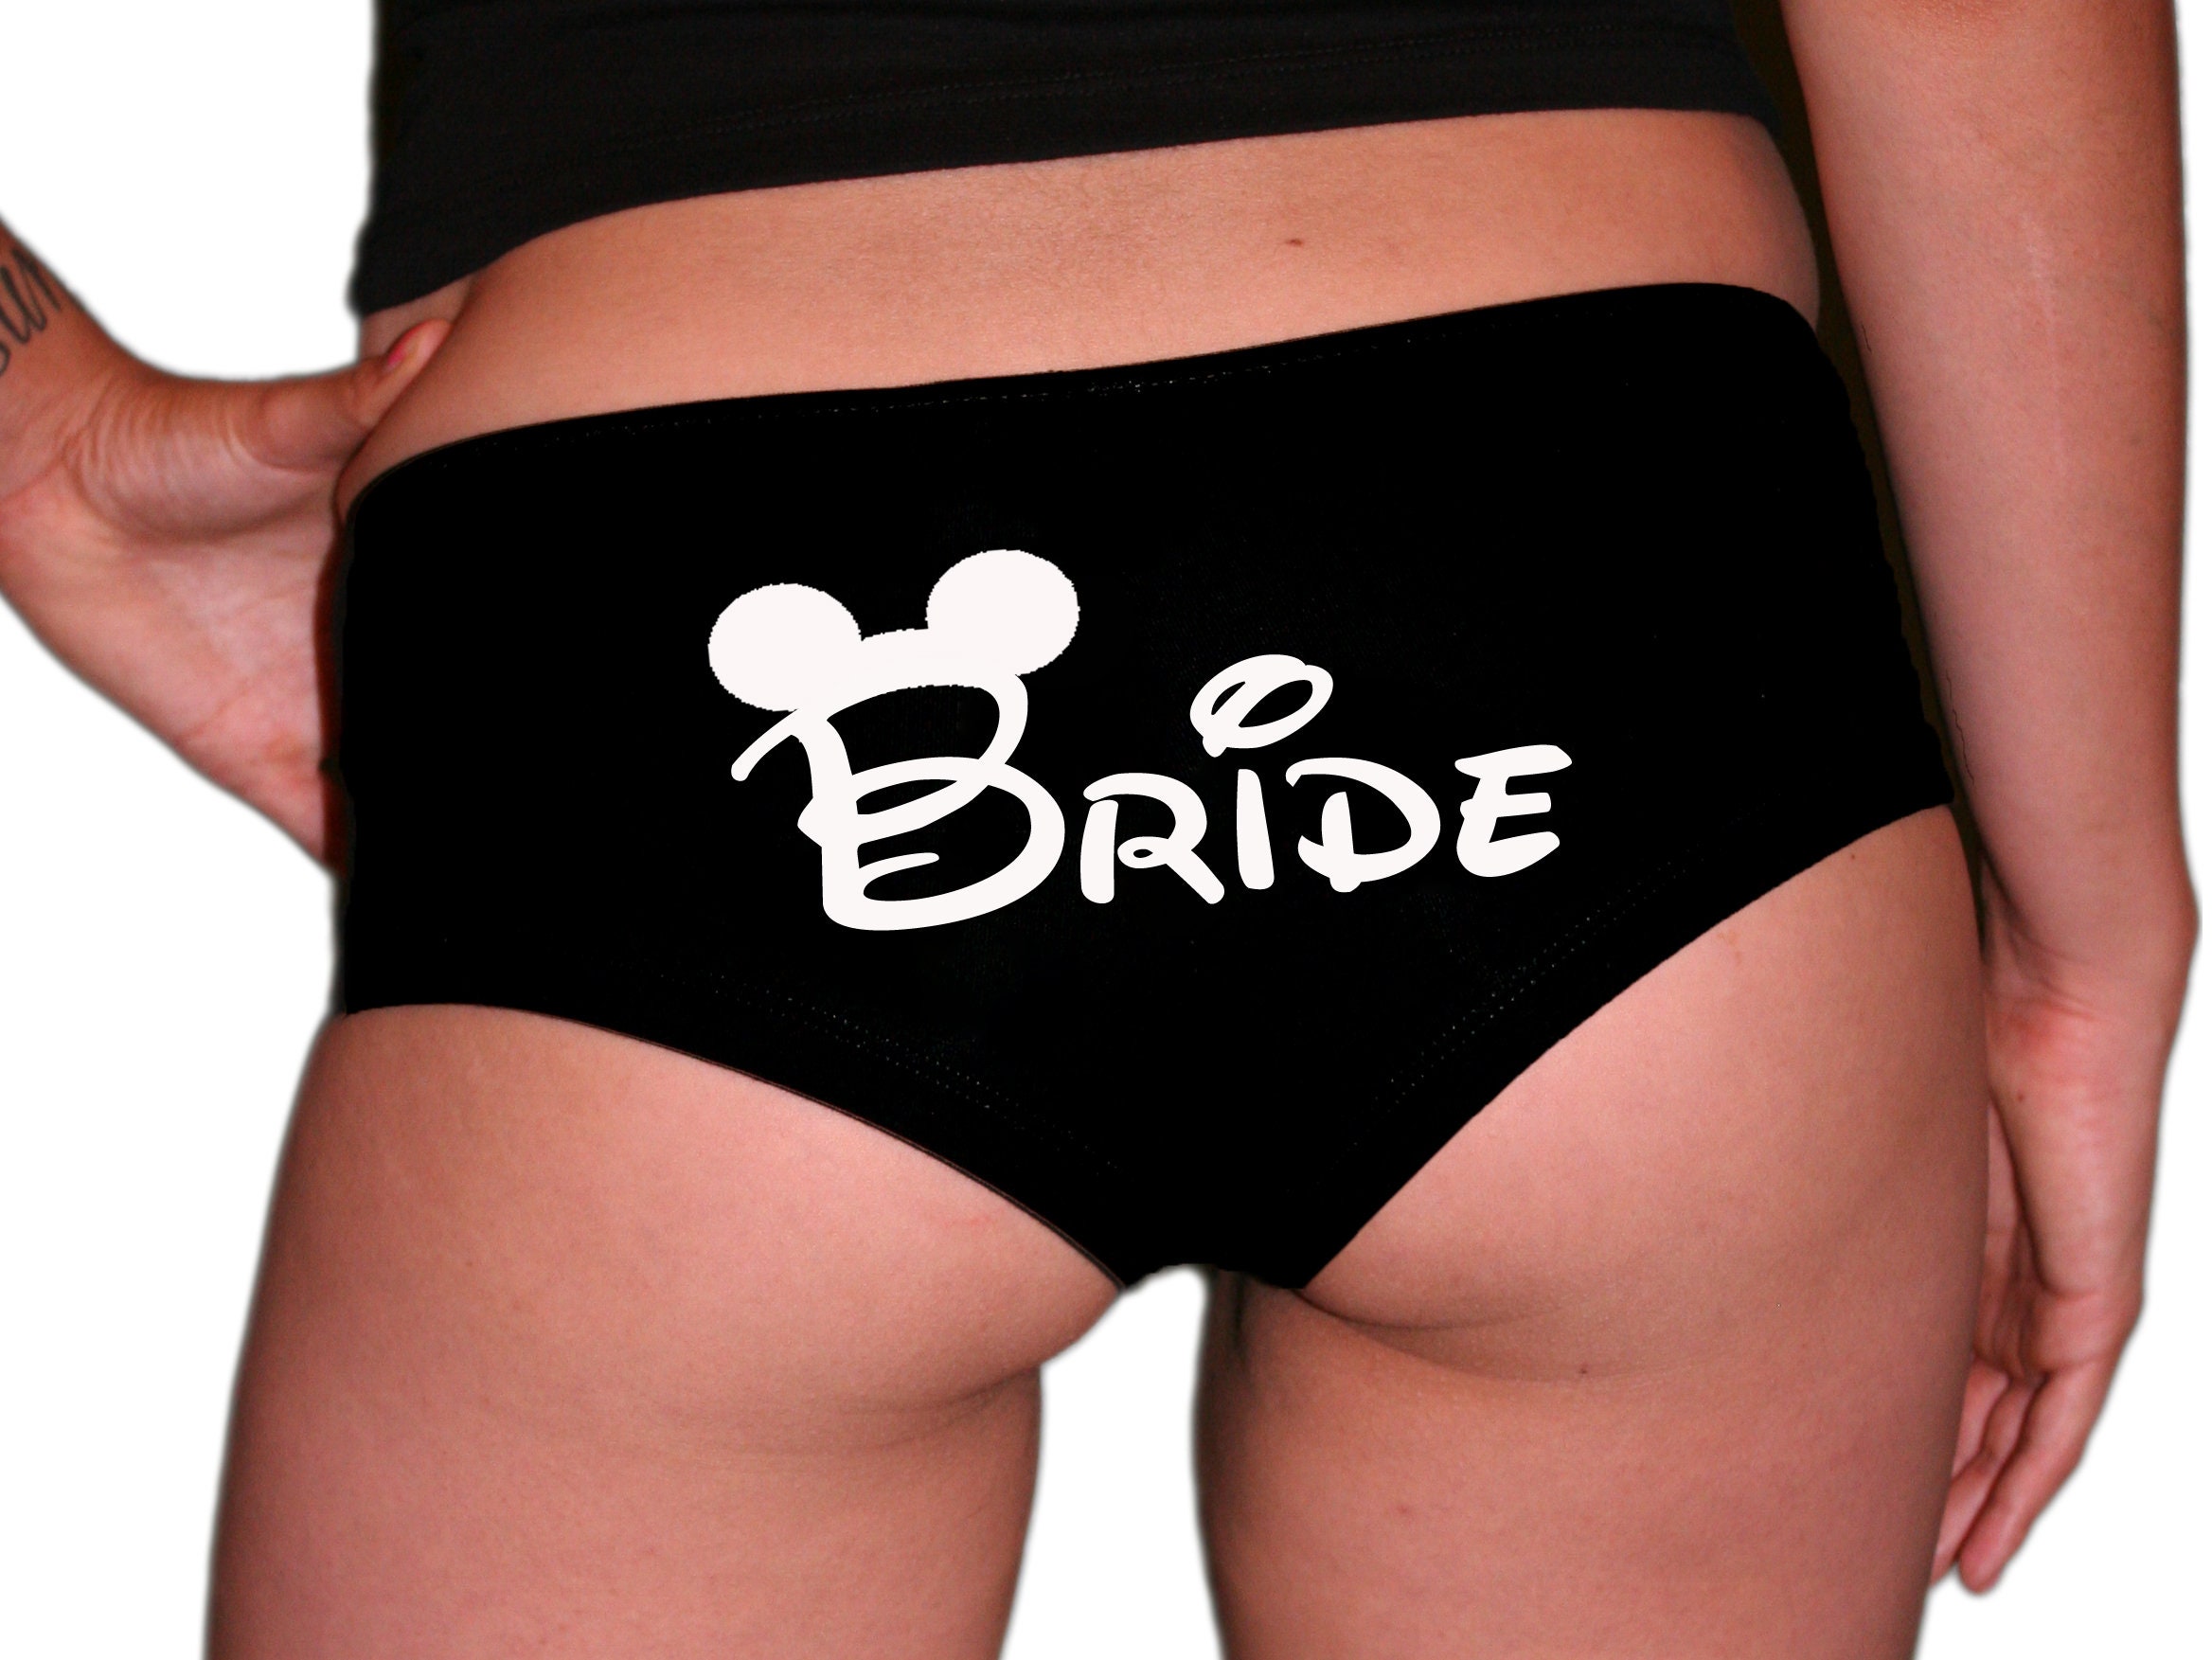 Disney Beauty And The Beast Womens Underwear - Available Small